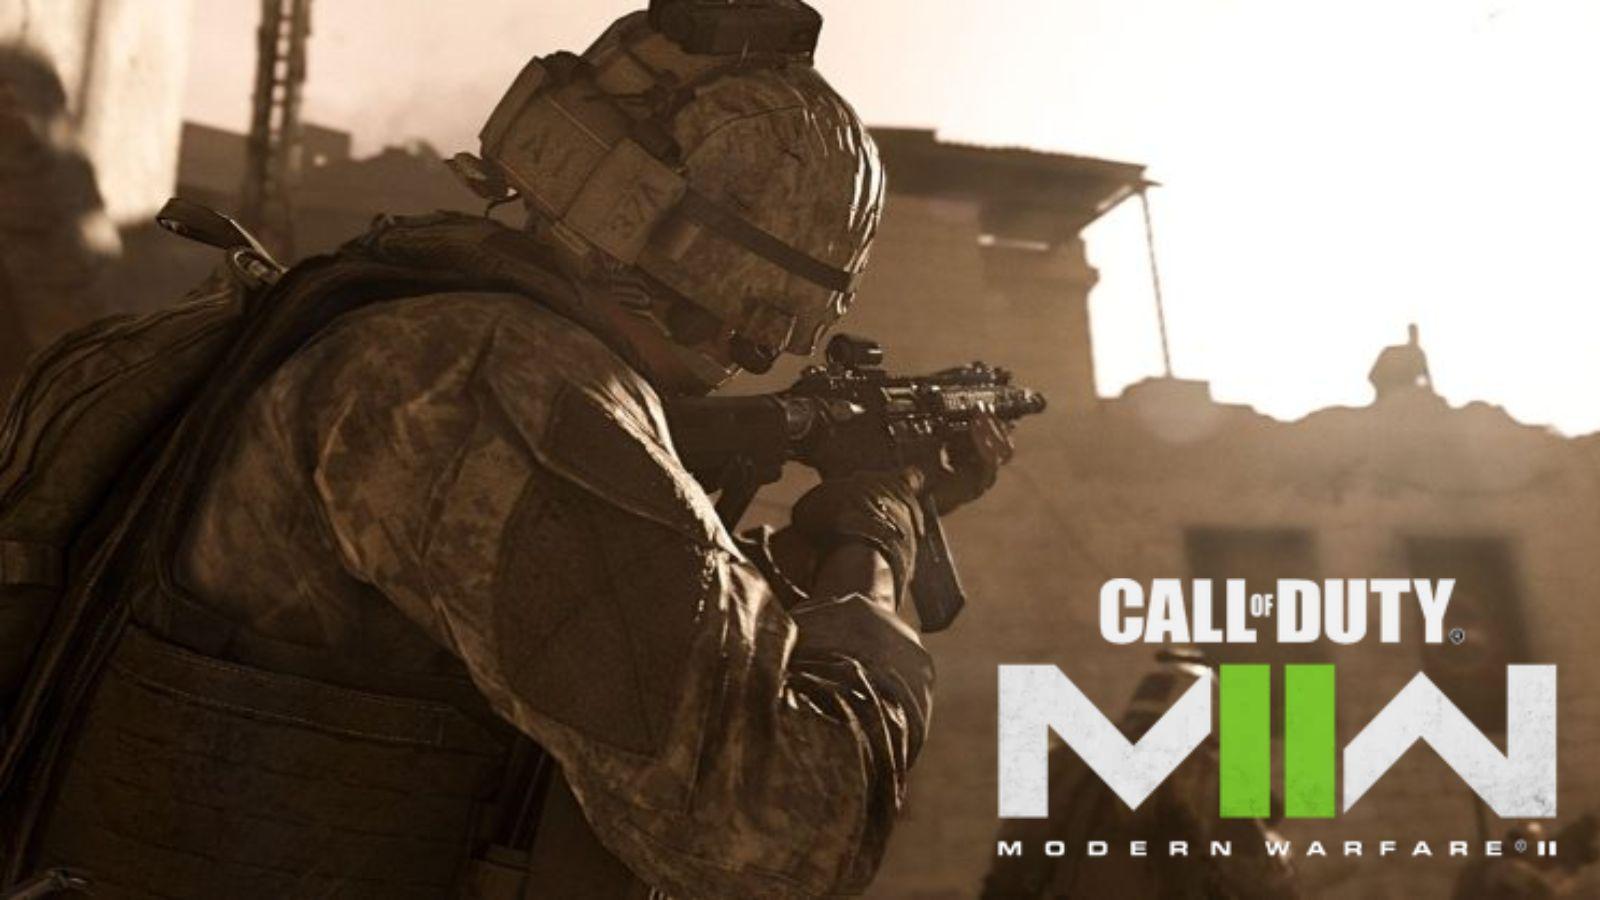 Here's what's in the $120 version of Call of Duty: Advanced